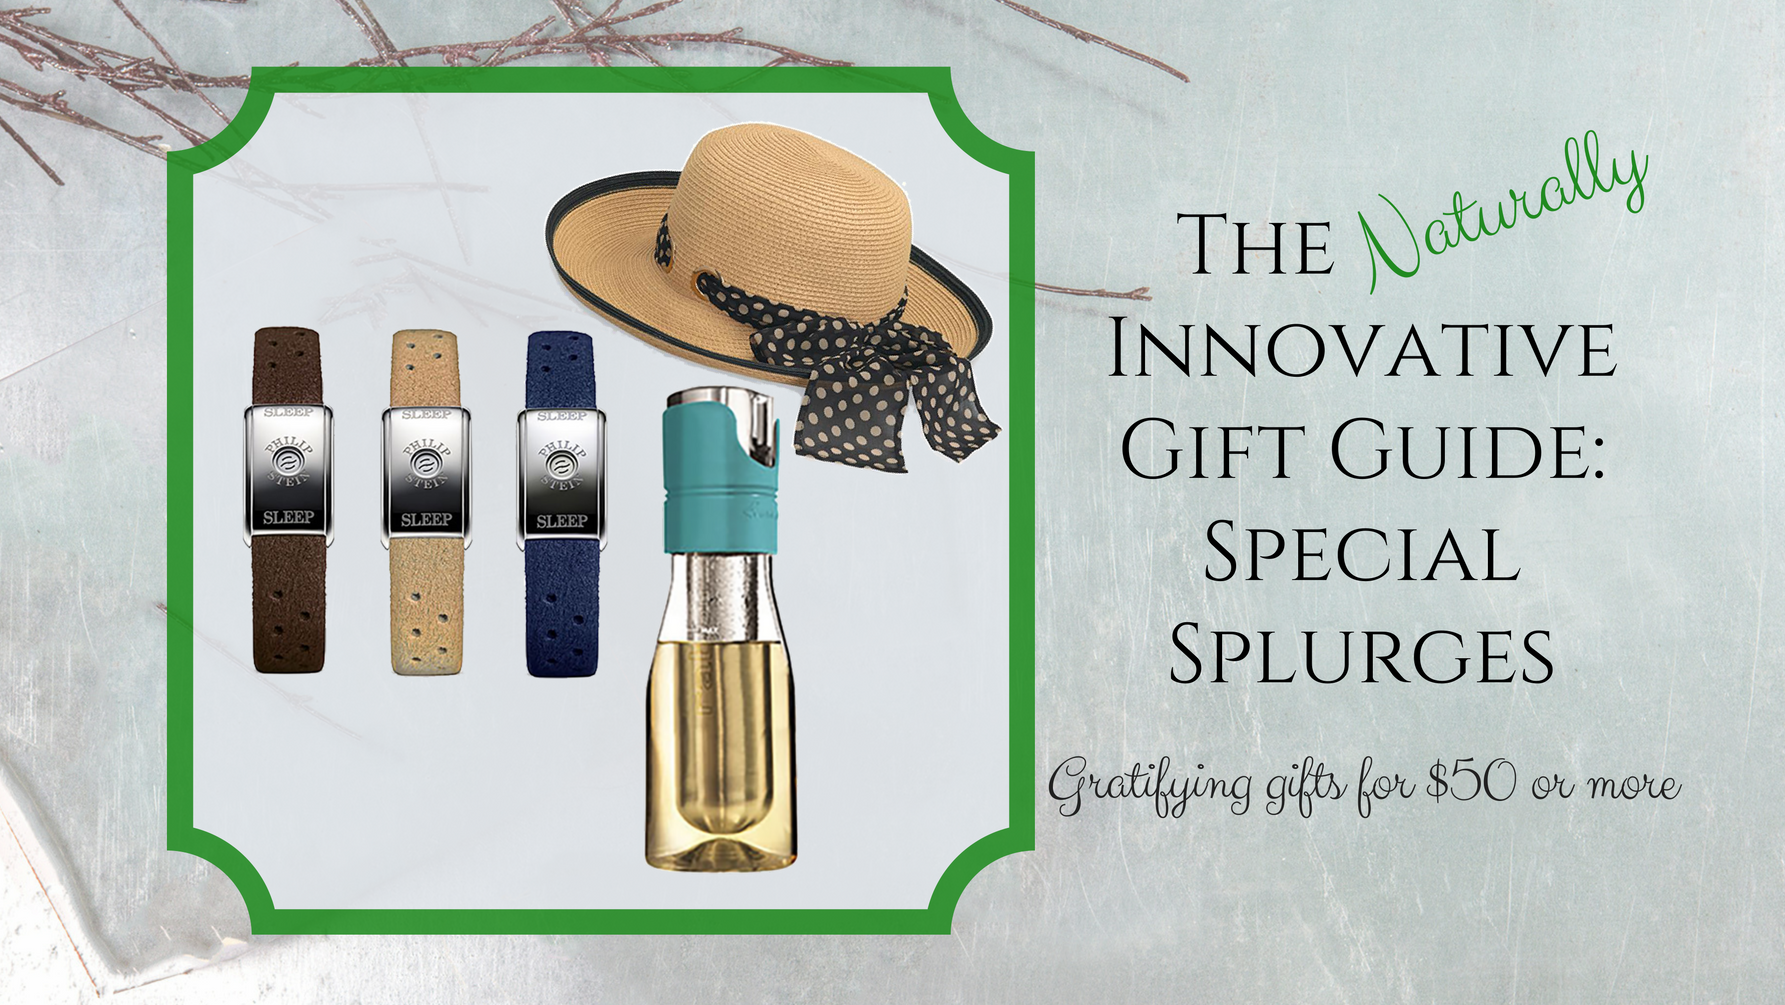 The Naturally Innovative Gift Guide: Special Splurges